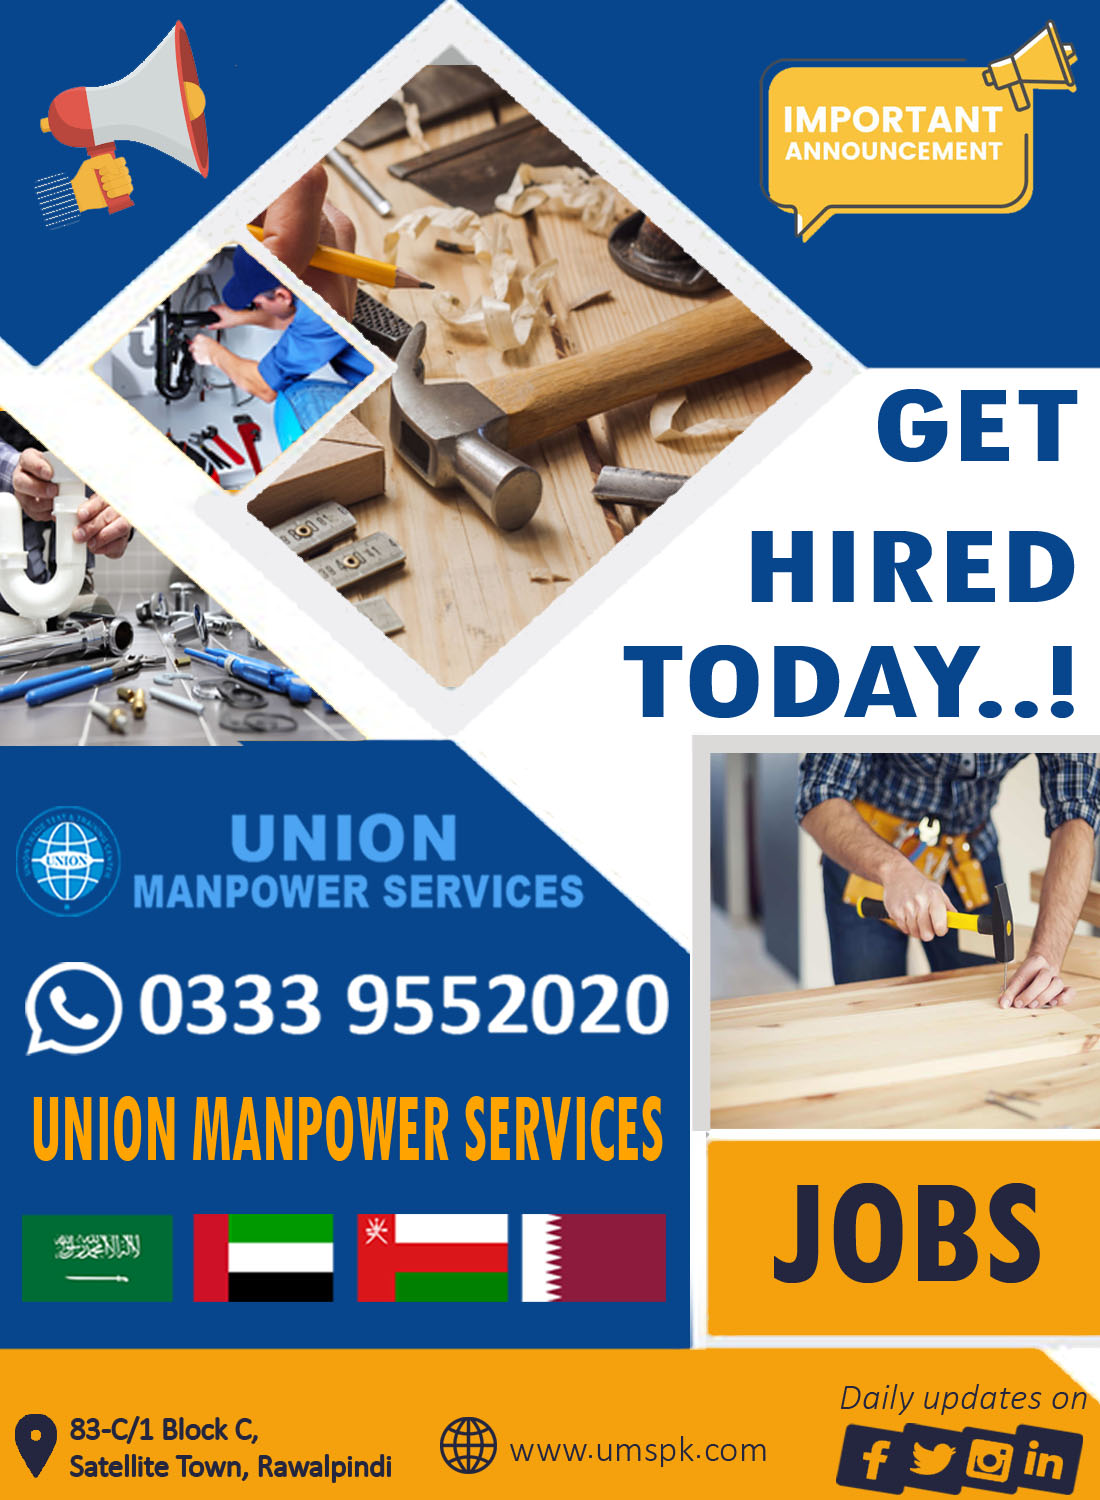 When we talk about manpower services in Pakistan ,its worth considering Union Manpower Services too. Union manpower services is the best overseas manpower recruitment agency in Rawalpindi.